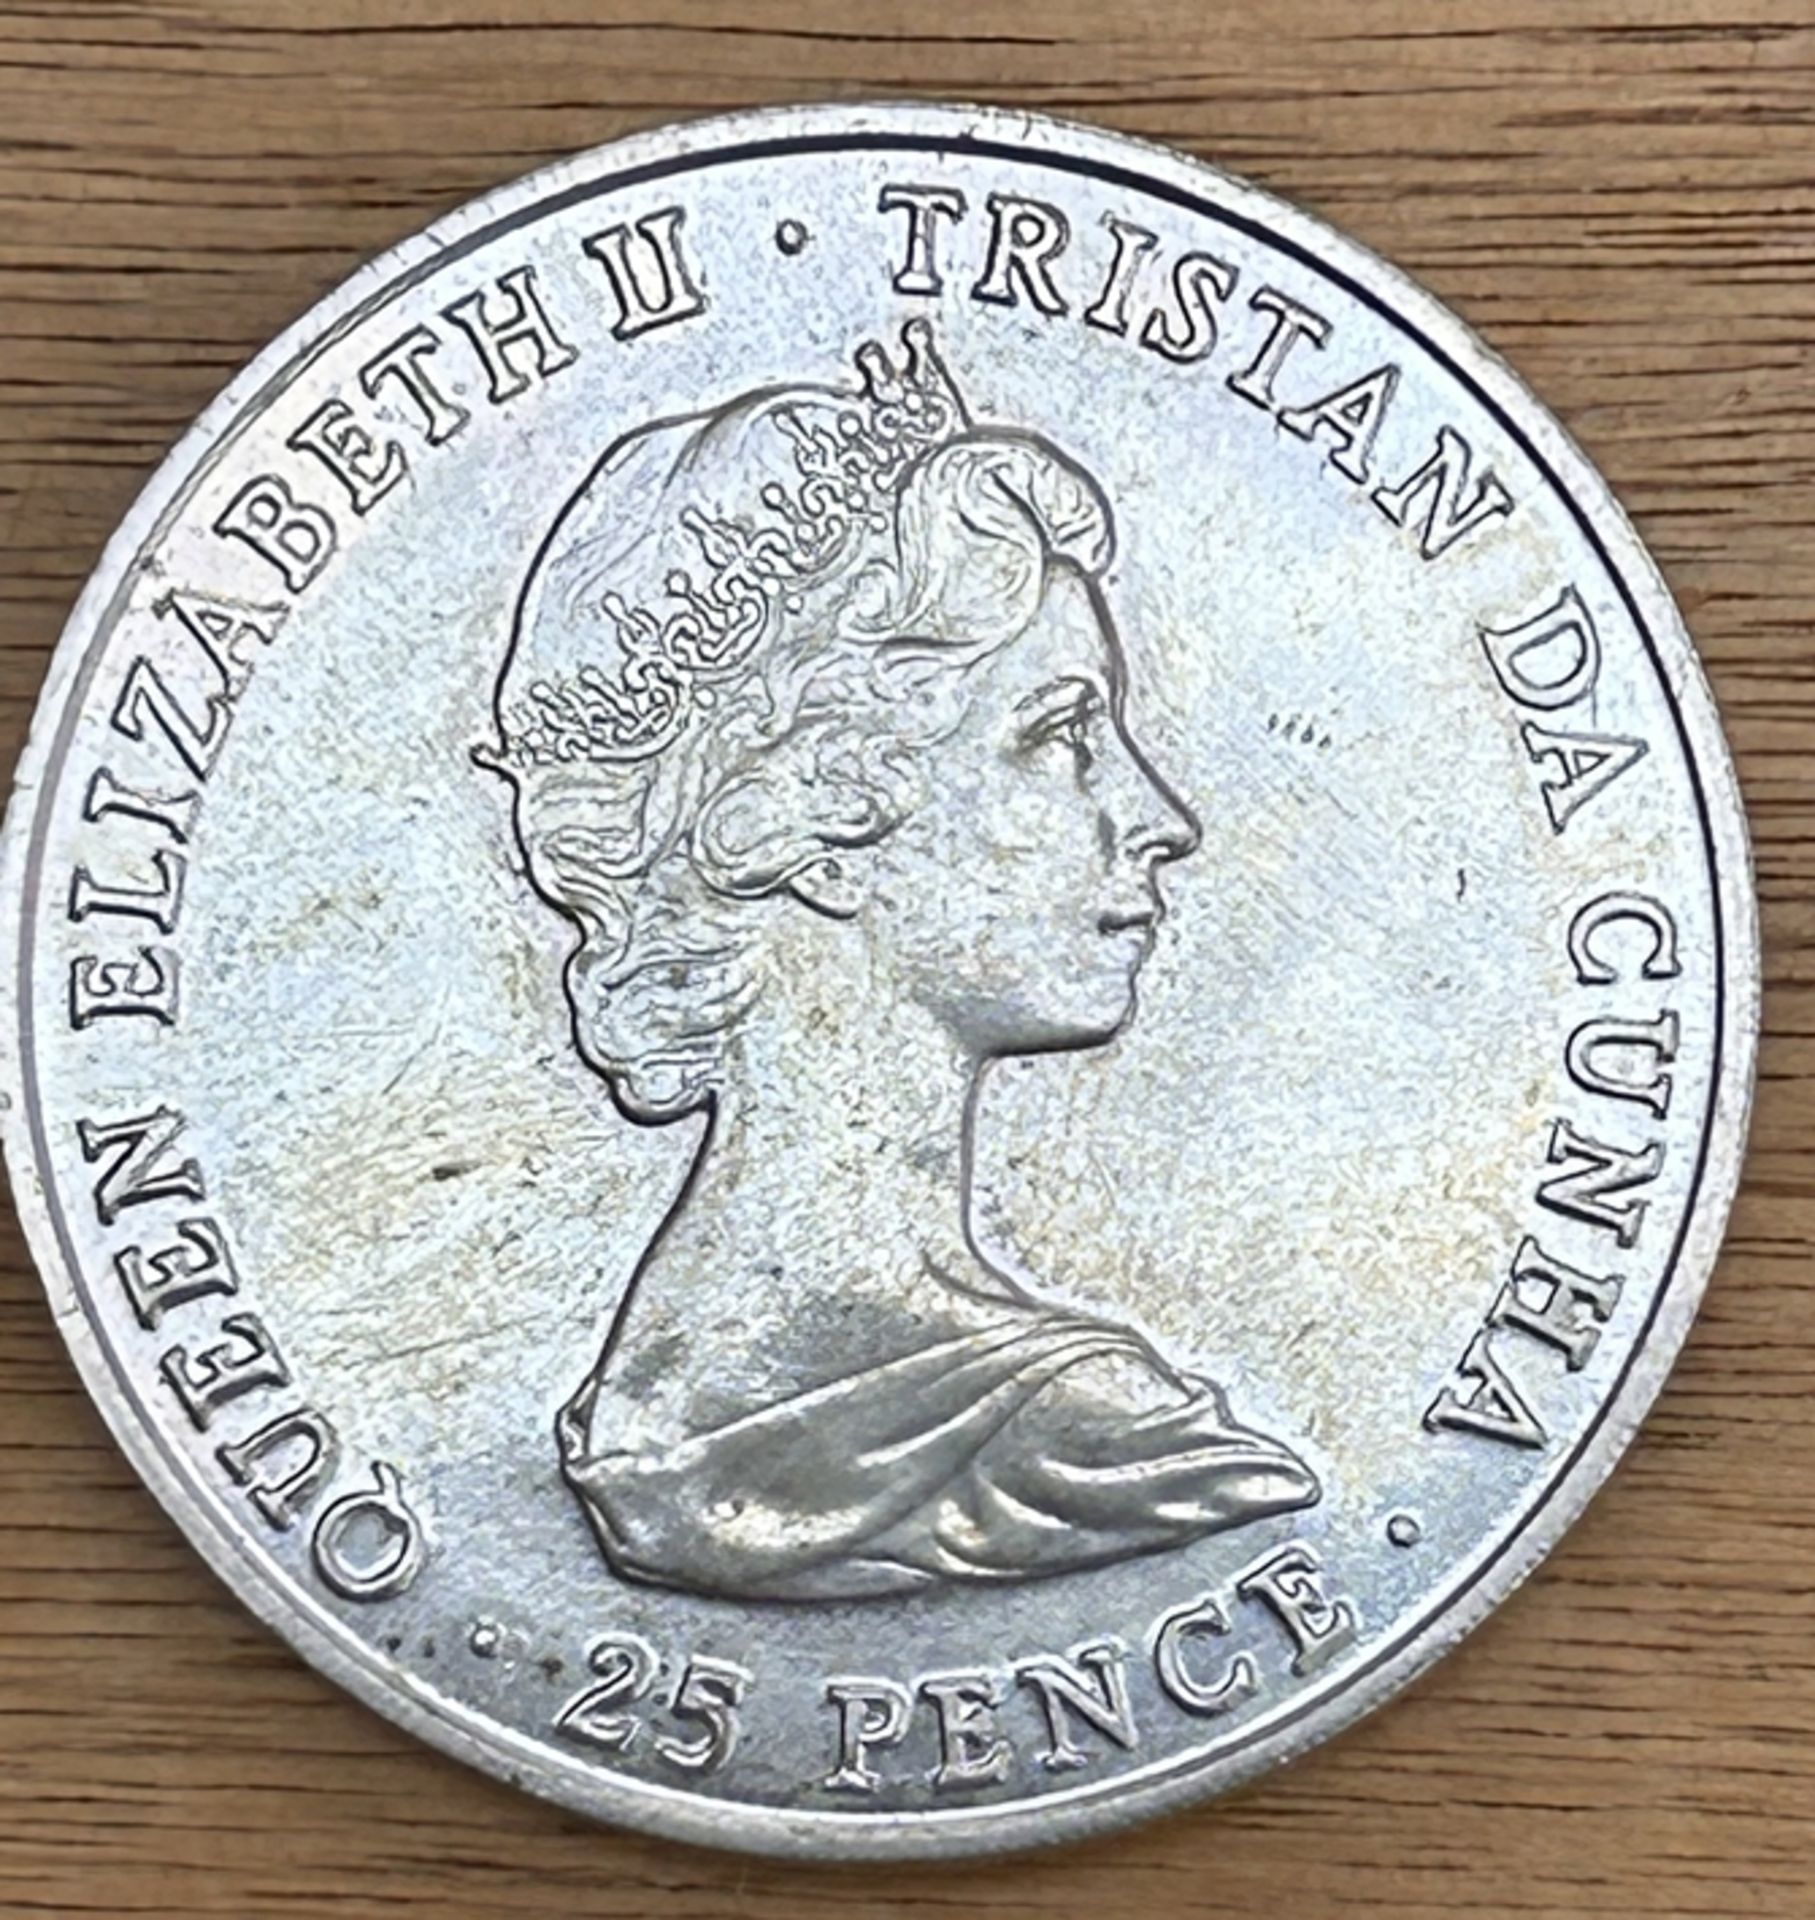 25 Pence-Elizabeth II Queen Muther, 4. Aug. 1980, Tristan da Cunha, Silber-925-, 25,5 gr - Image 2 of 2